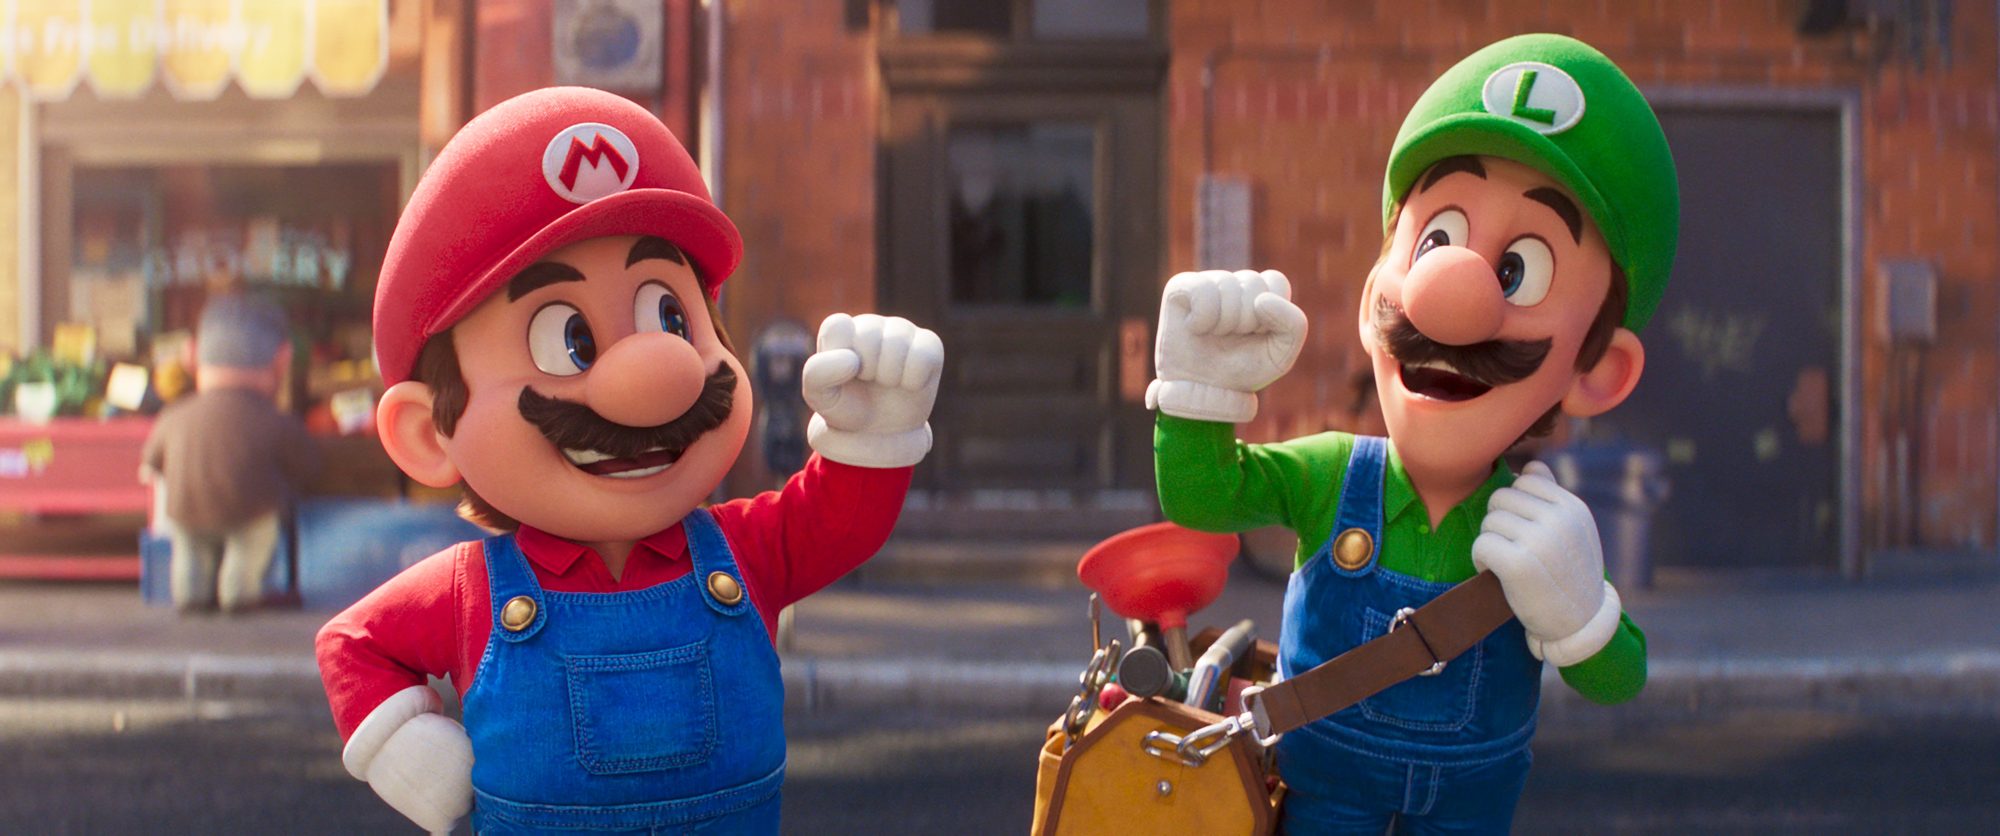 'The Super Mario Bros. Movie' Mario (voiced by Chris Pratt) and Luigi (voiced by Charlie Day) holding up their fists into the air in front of a brick building. Luigi has a bag of plumbing tools.